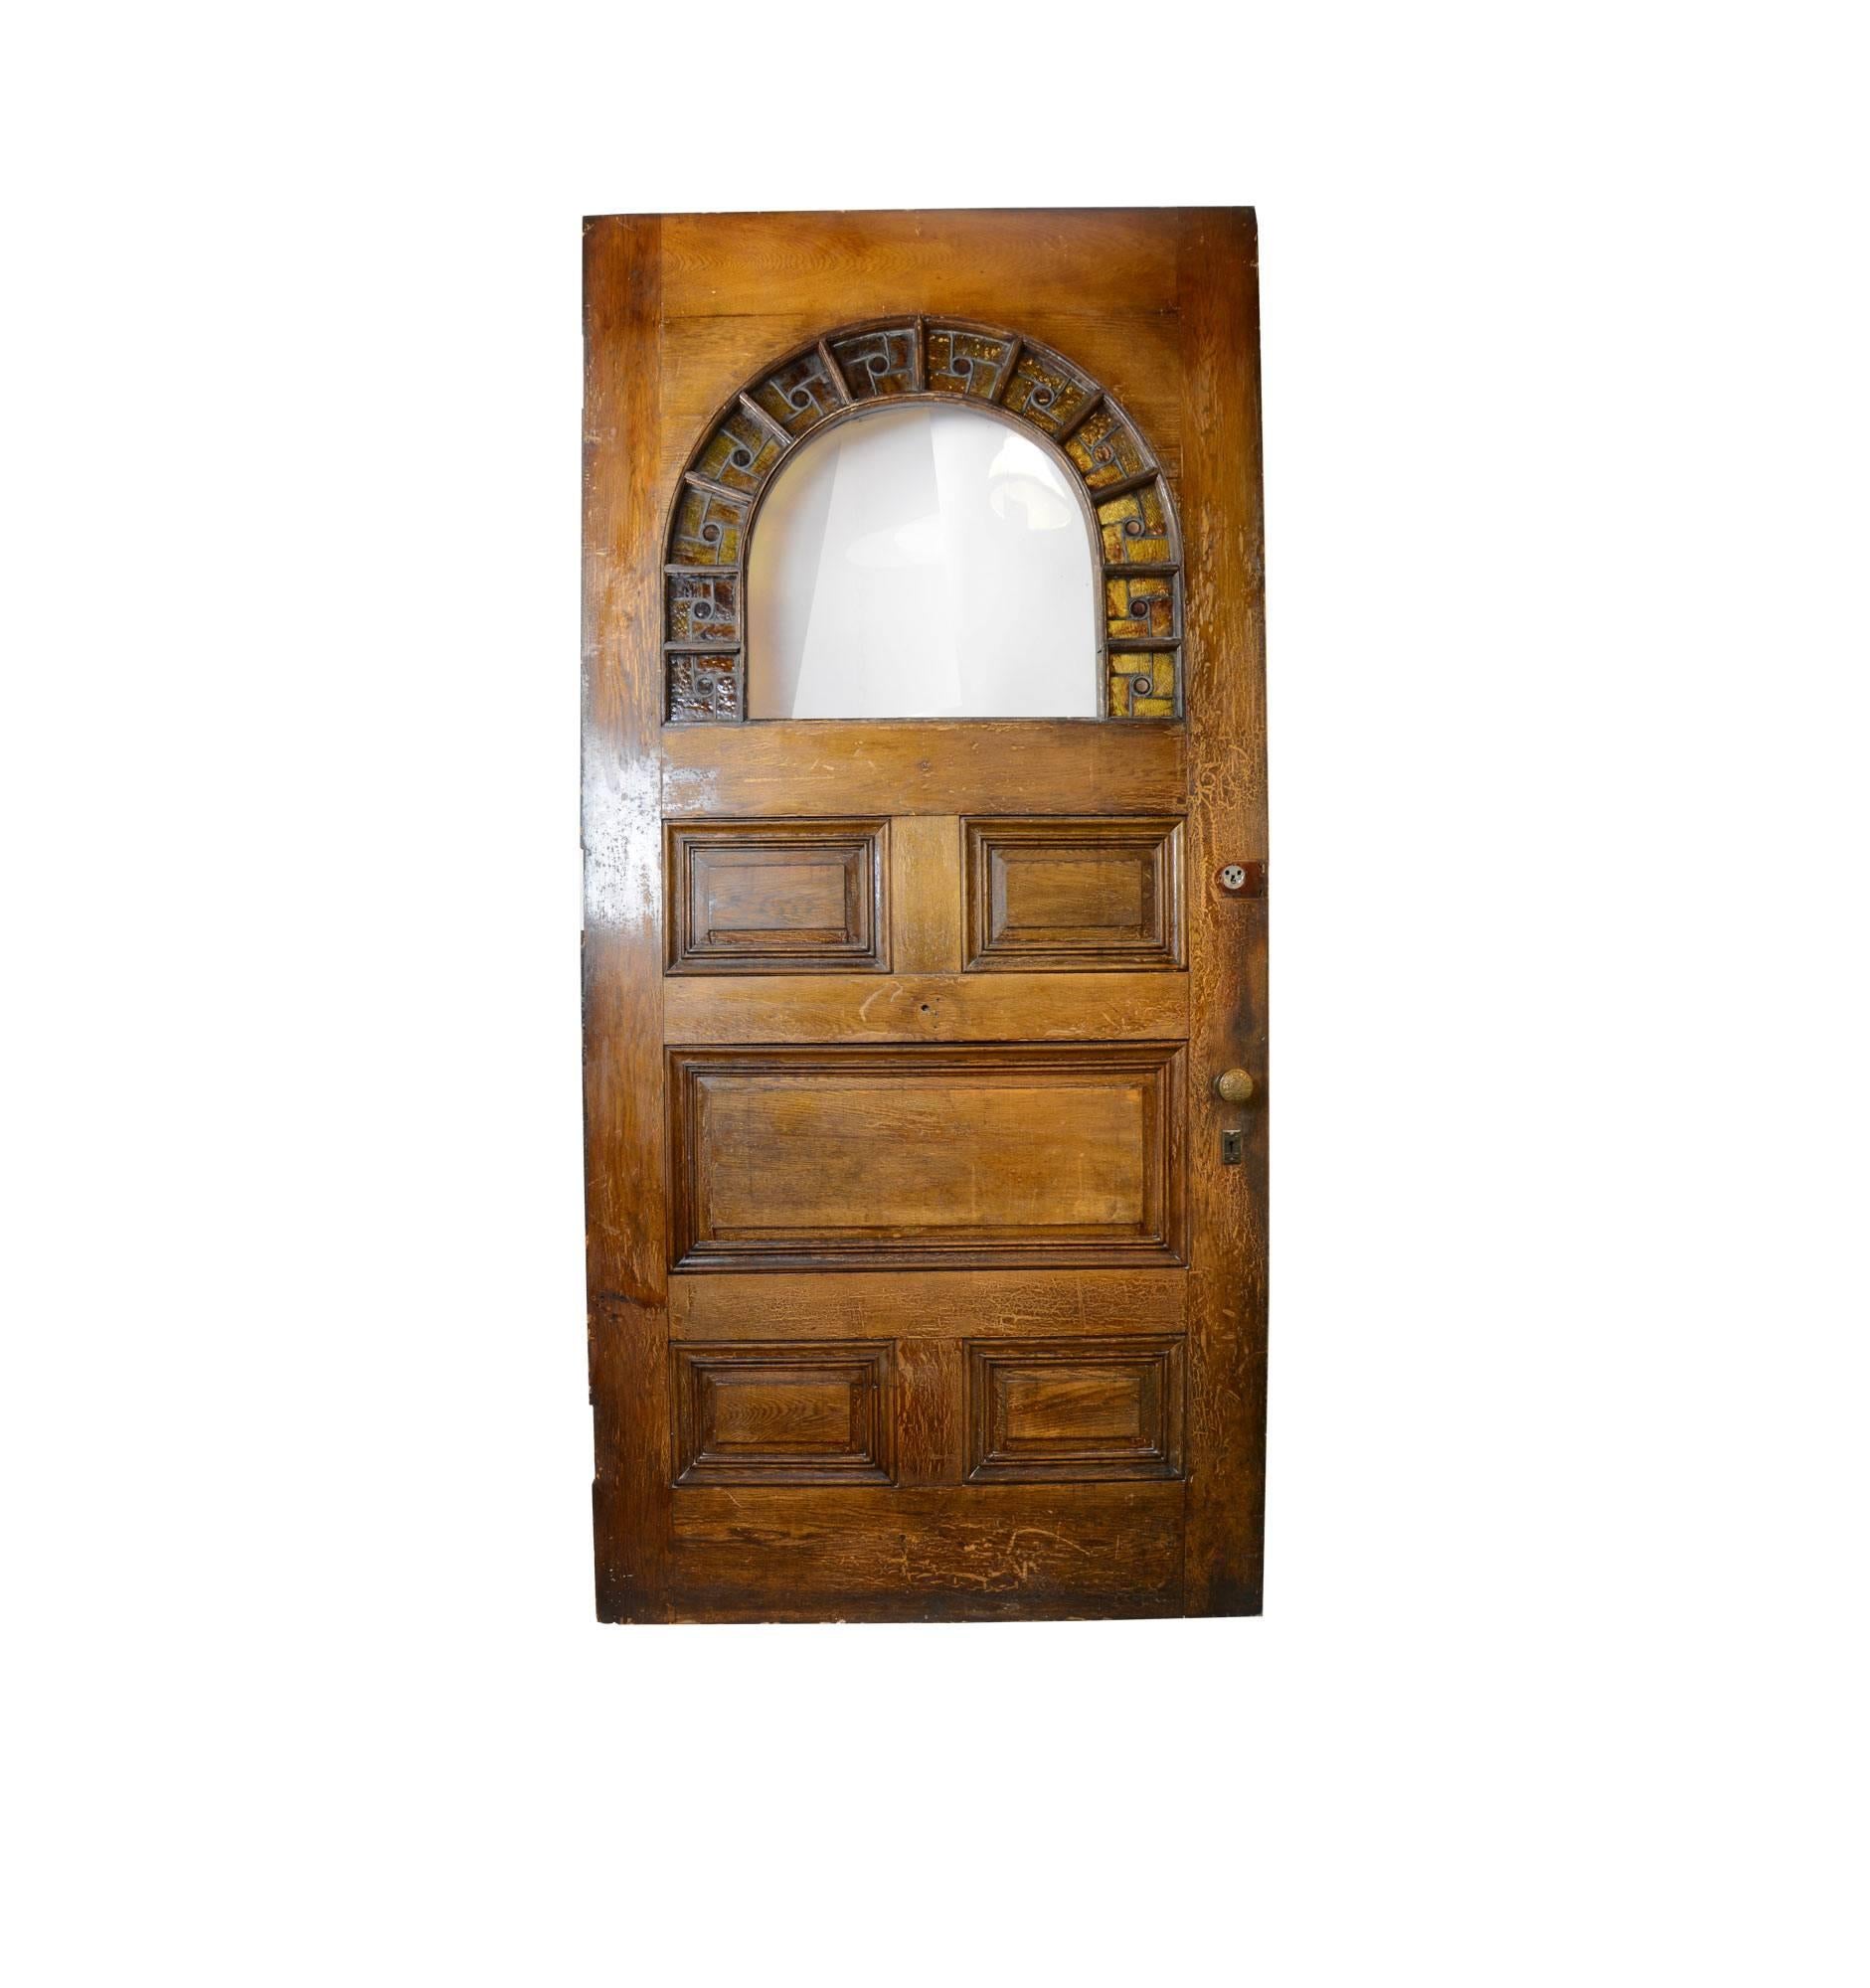 Made circa 1880, this solid oak door makes for an impressive entrance to any space. Standing at 8 feet tall, the door features an arch with beautiful amber-colored stained glass and red jewels. Decoration covers much of this door, as the top of the